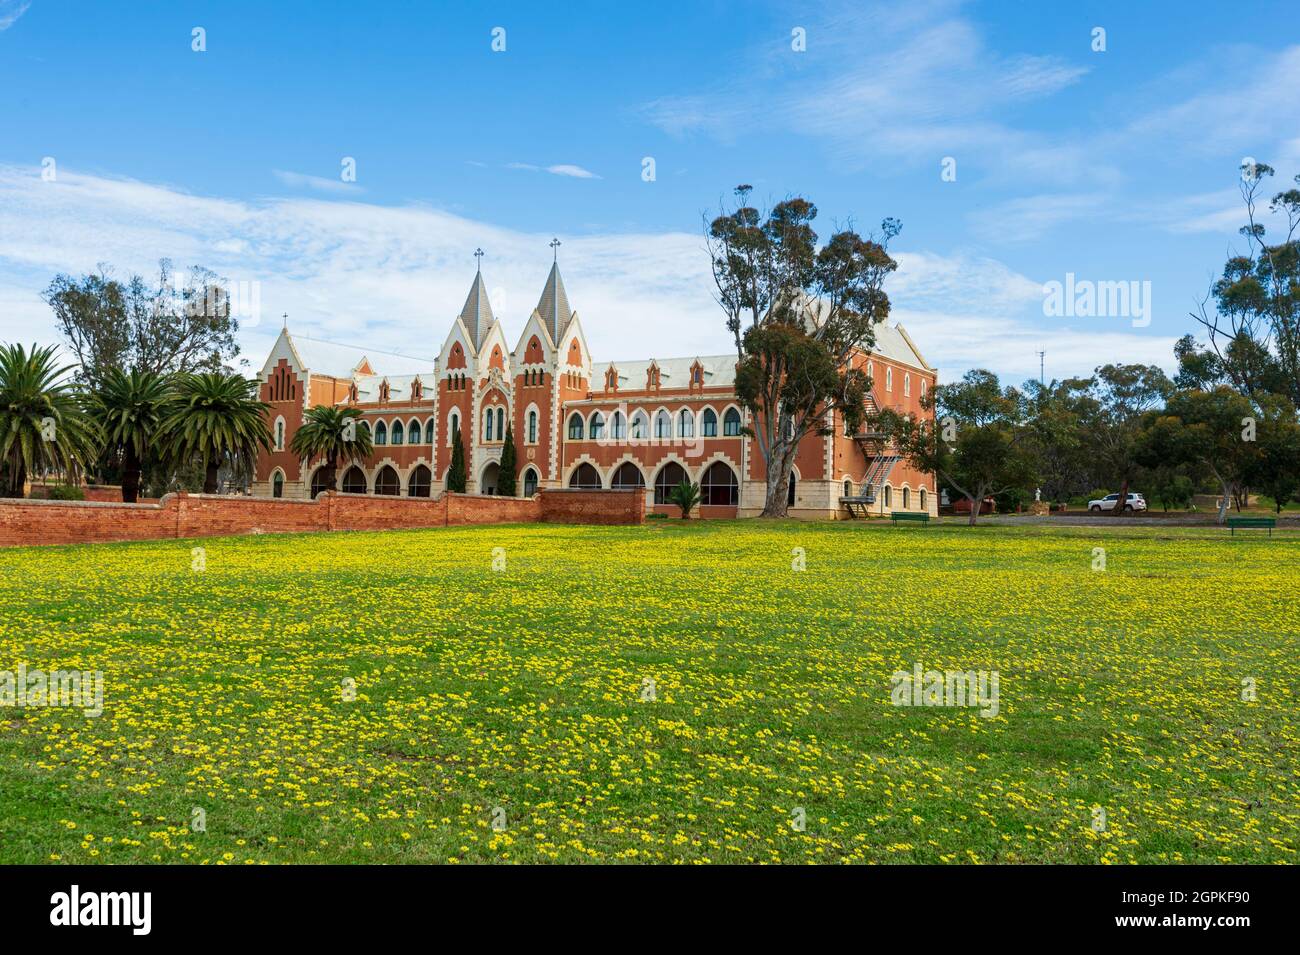 View of St Gertrude’s College with a field of yellow wildflowers in spring, New Norcia, Western Australia, Australia Stock Photo